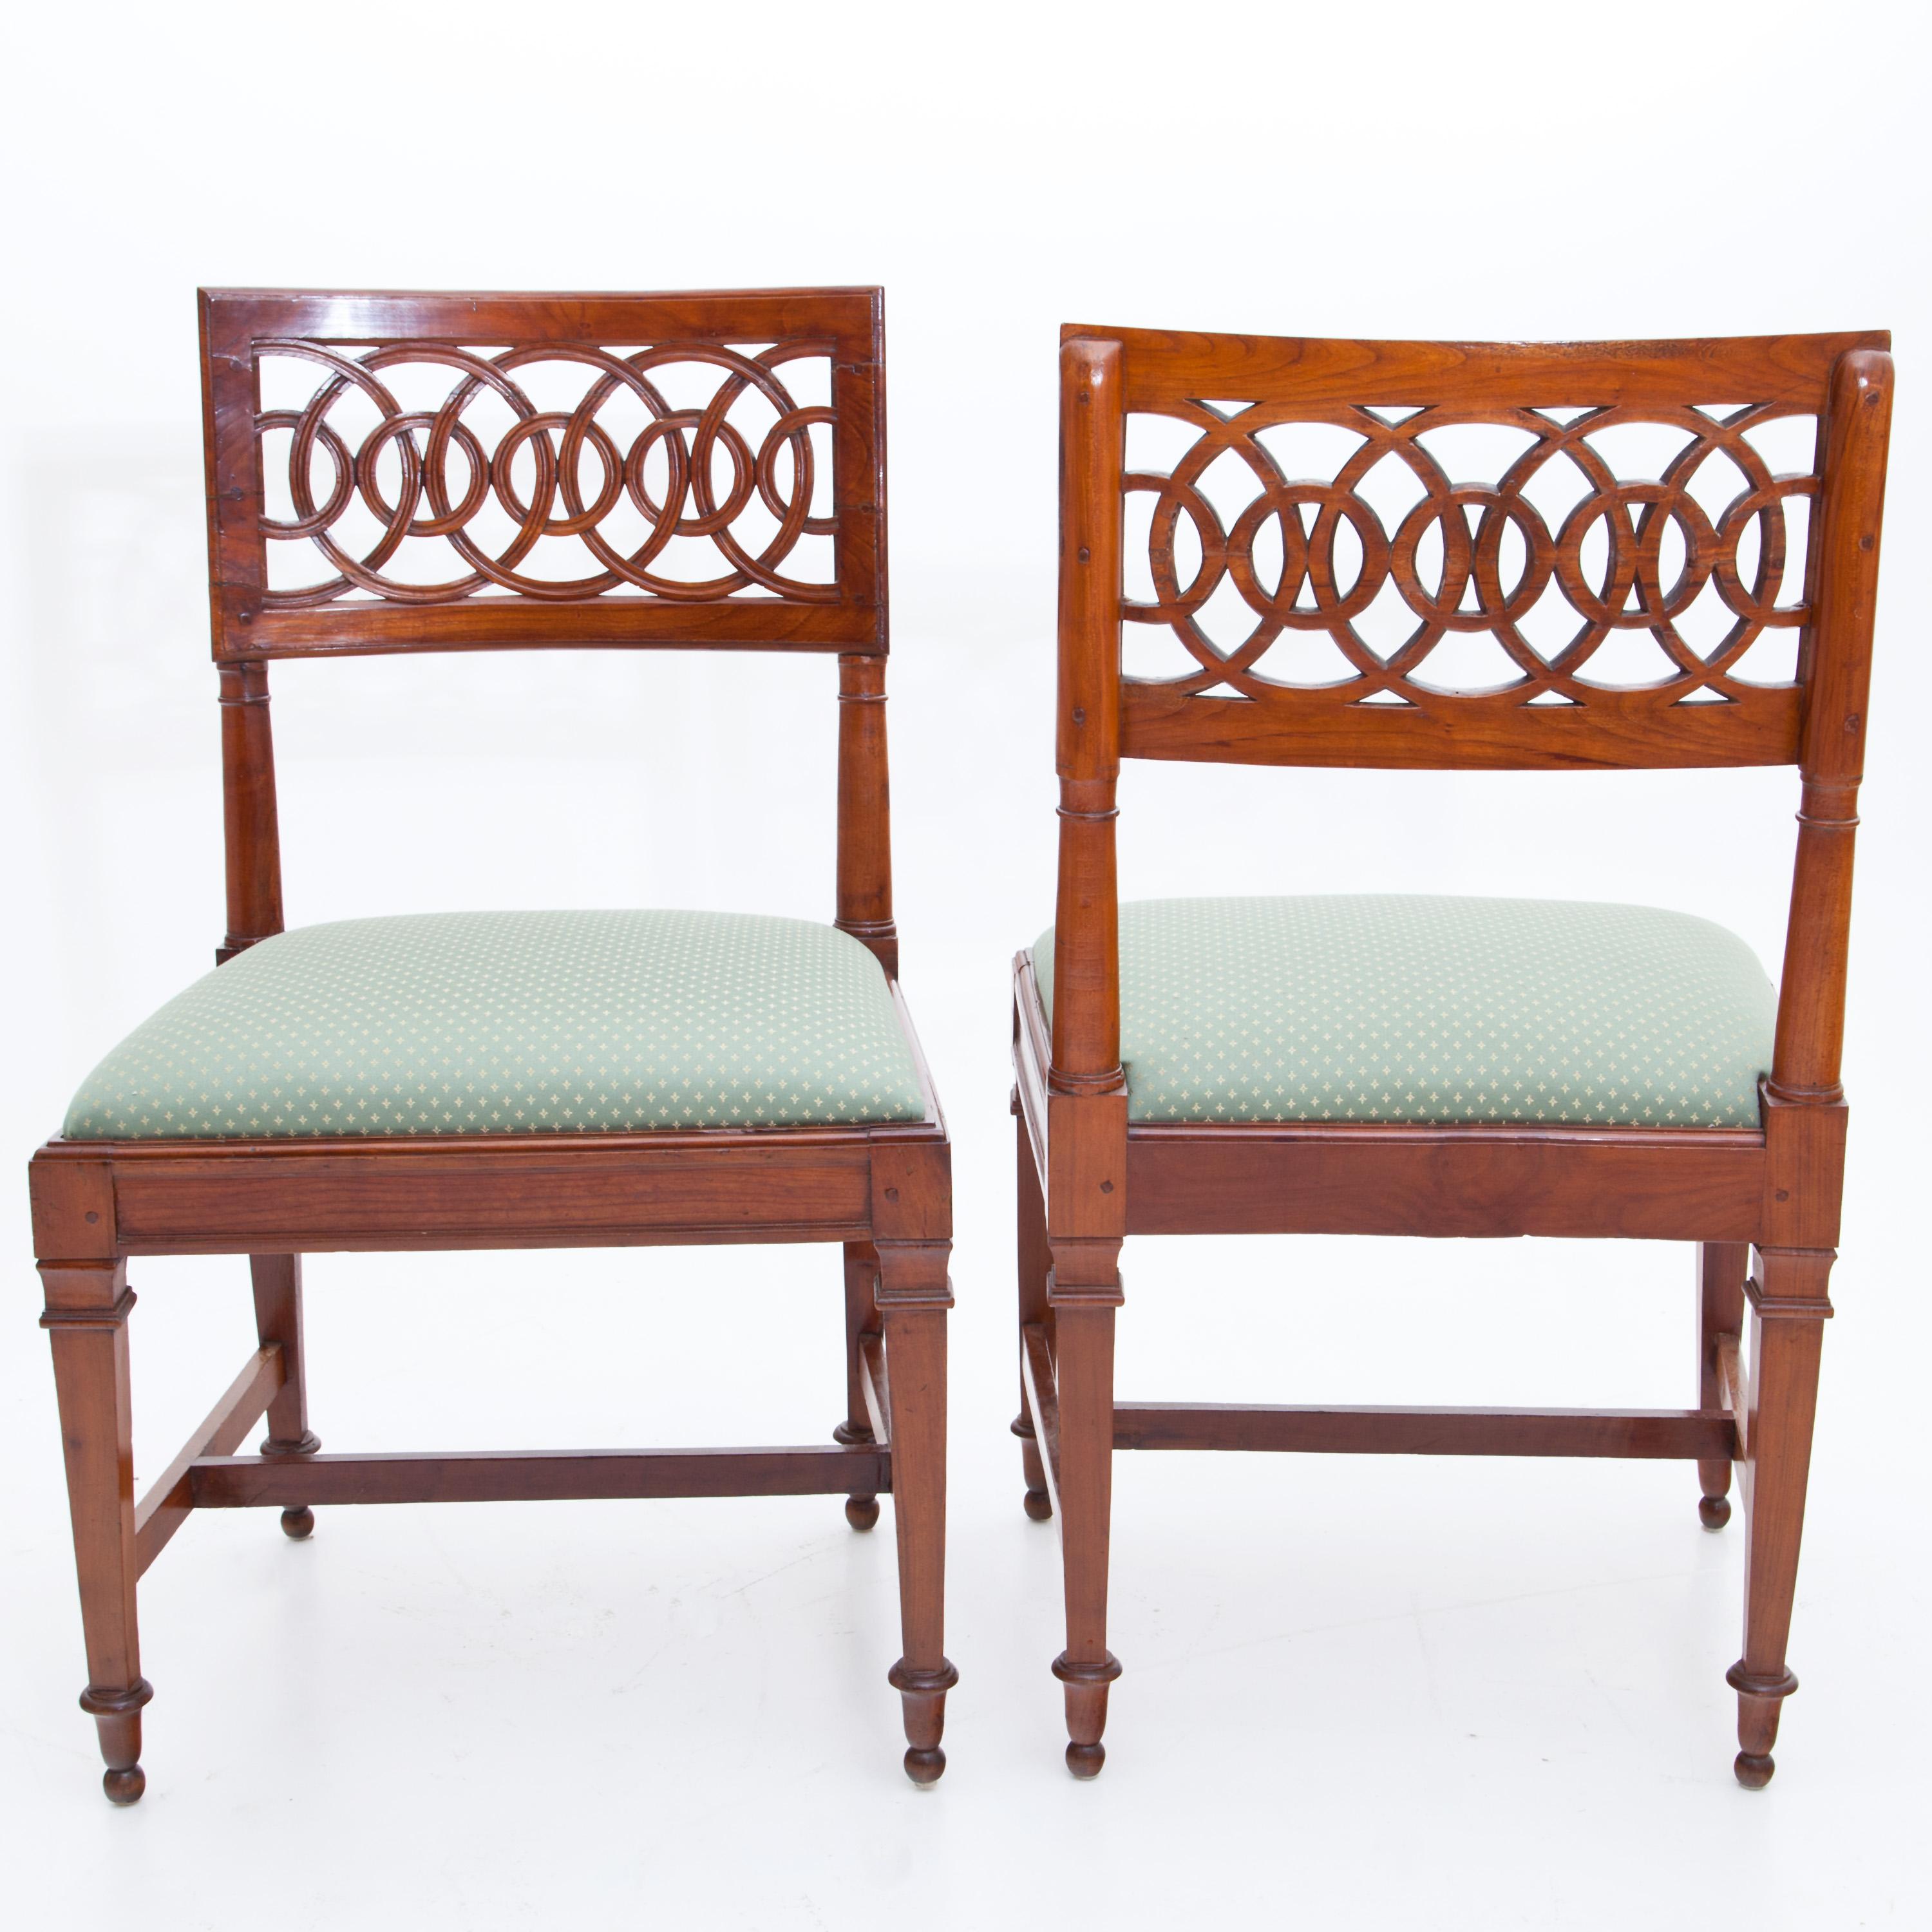 Italian Set of Six Solid Cherrywood Chairs, Lucca Italy, Late 18th Century